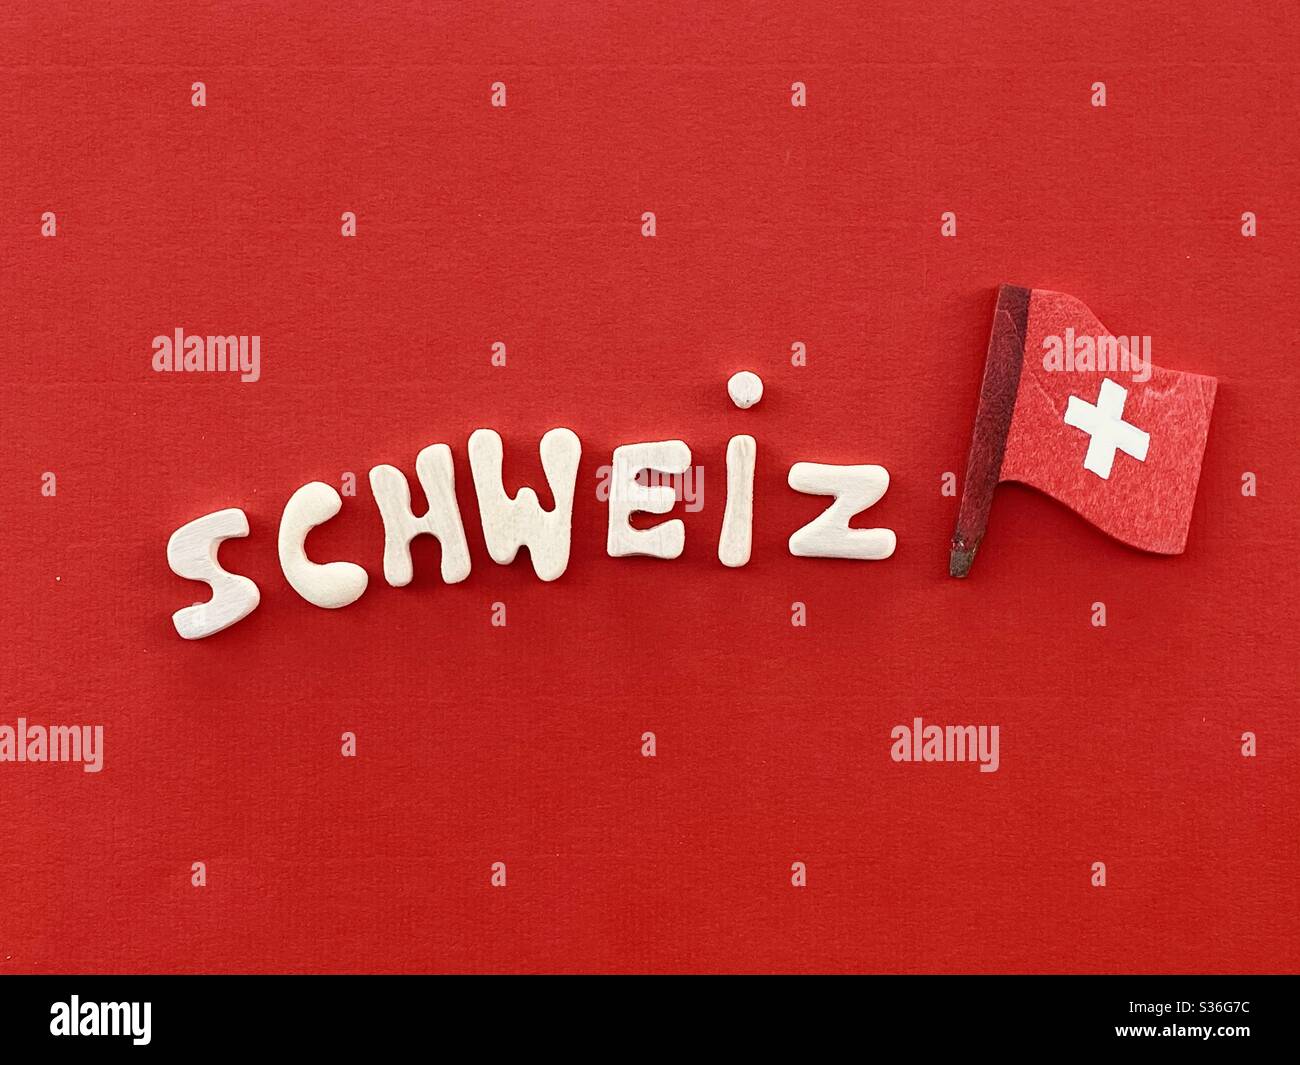 Schweiz, Switzerland country name in german language composed with handmade wooden letters over red color and wooden national flag Stock Photo